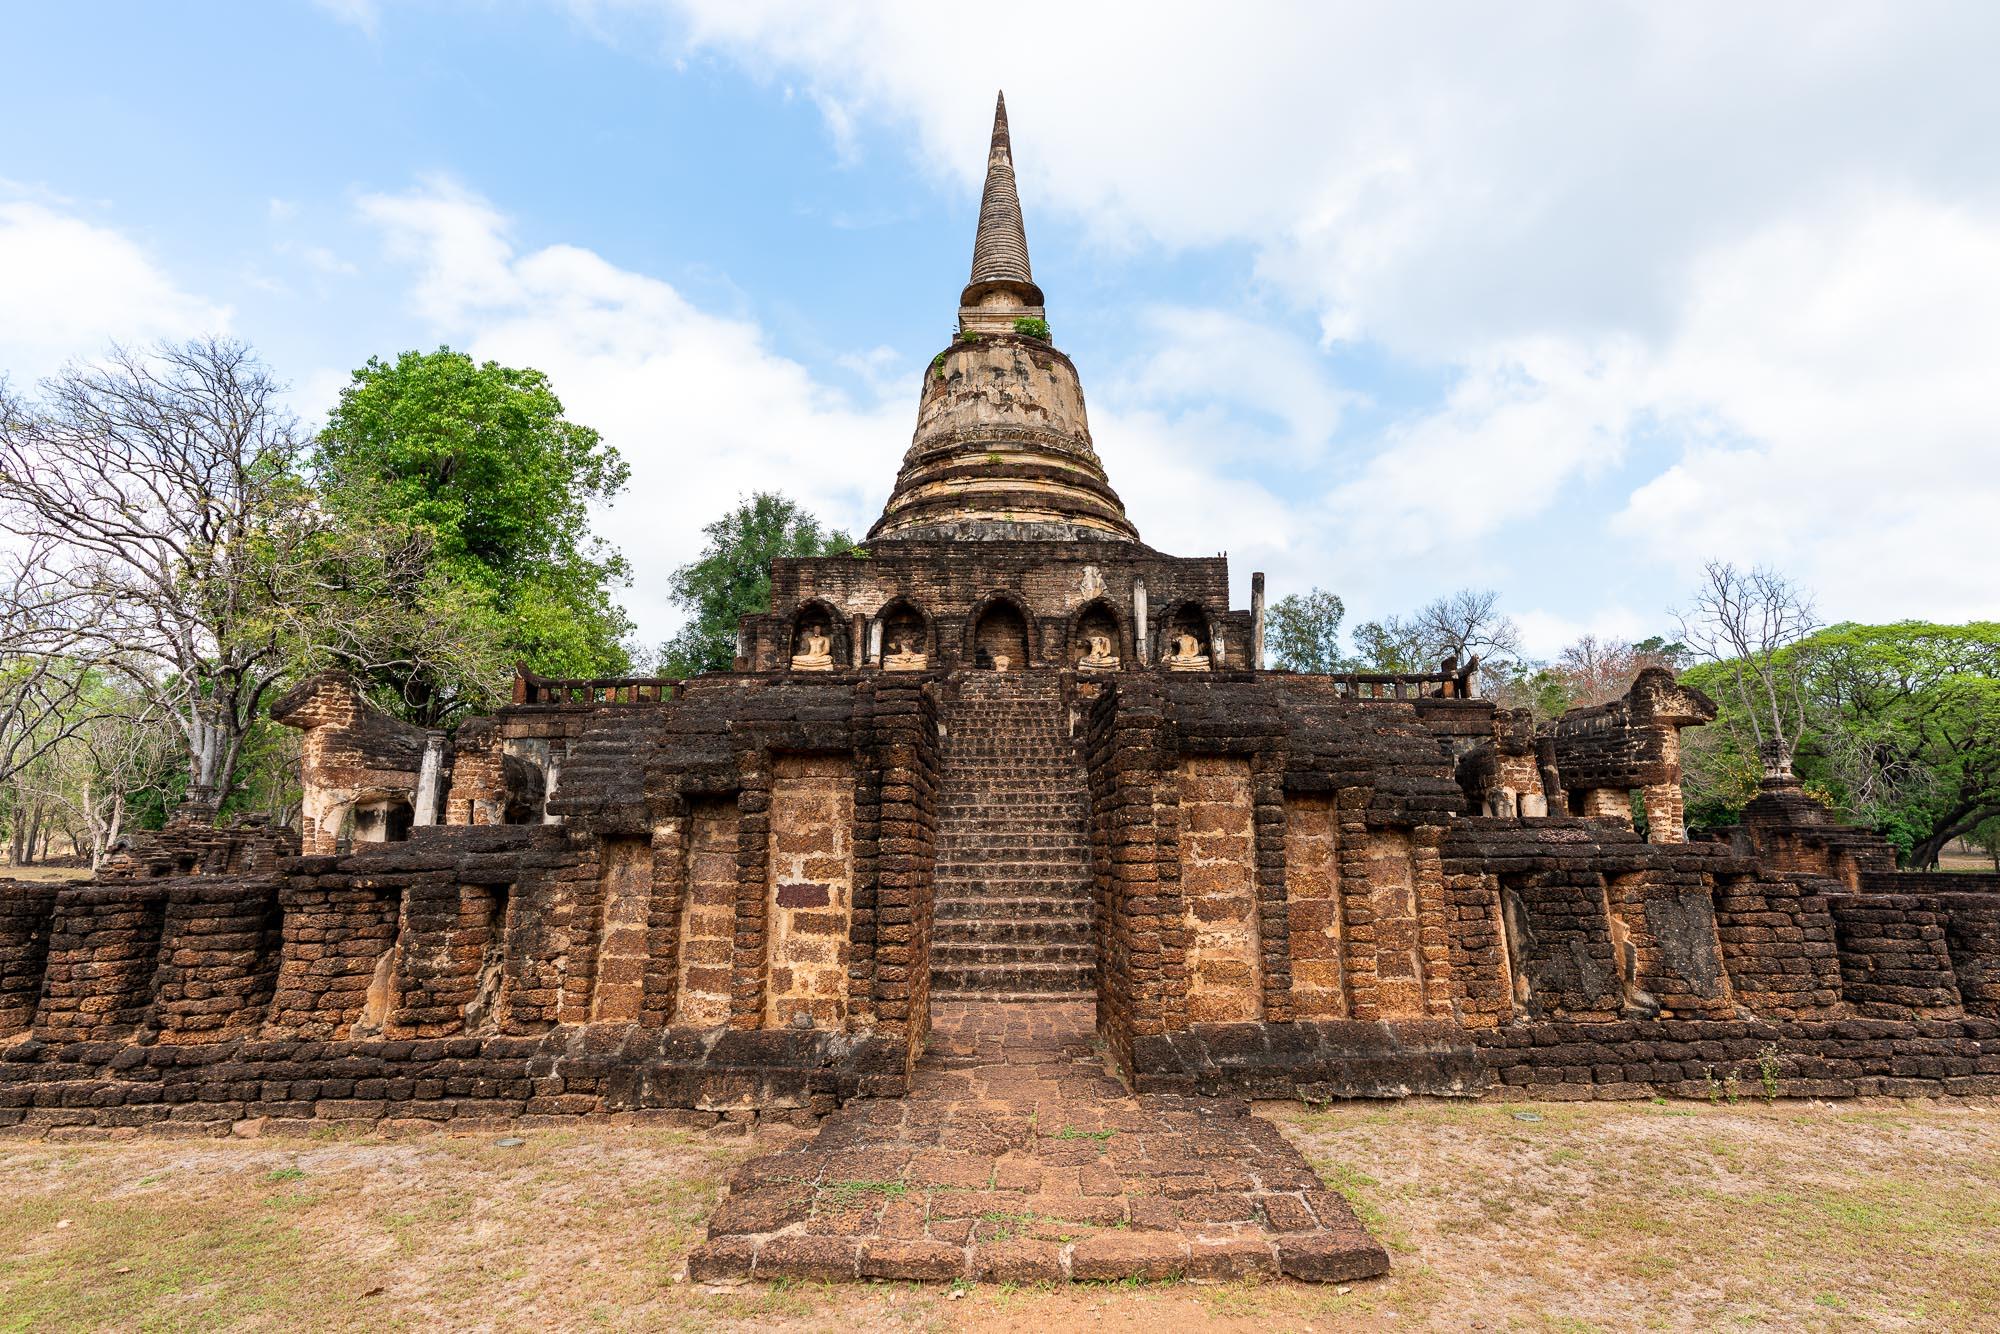 The temple of Wat Chang Lom in Si Satchanalai was one of the most important temples, as demonstrated by a row of elephant sculptures around its base. – © Michael Turtle